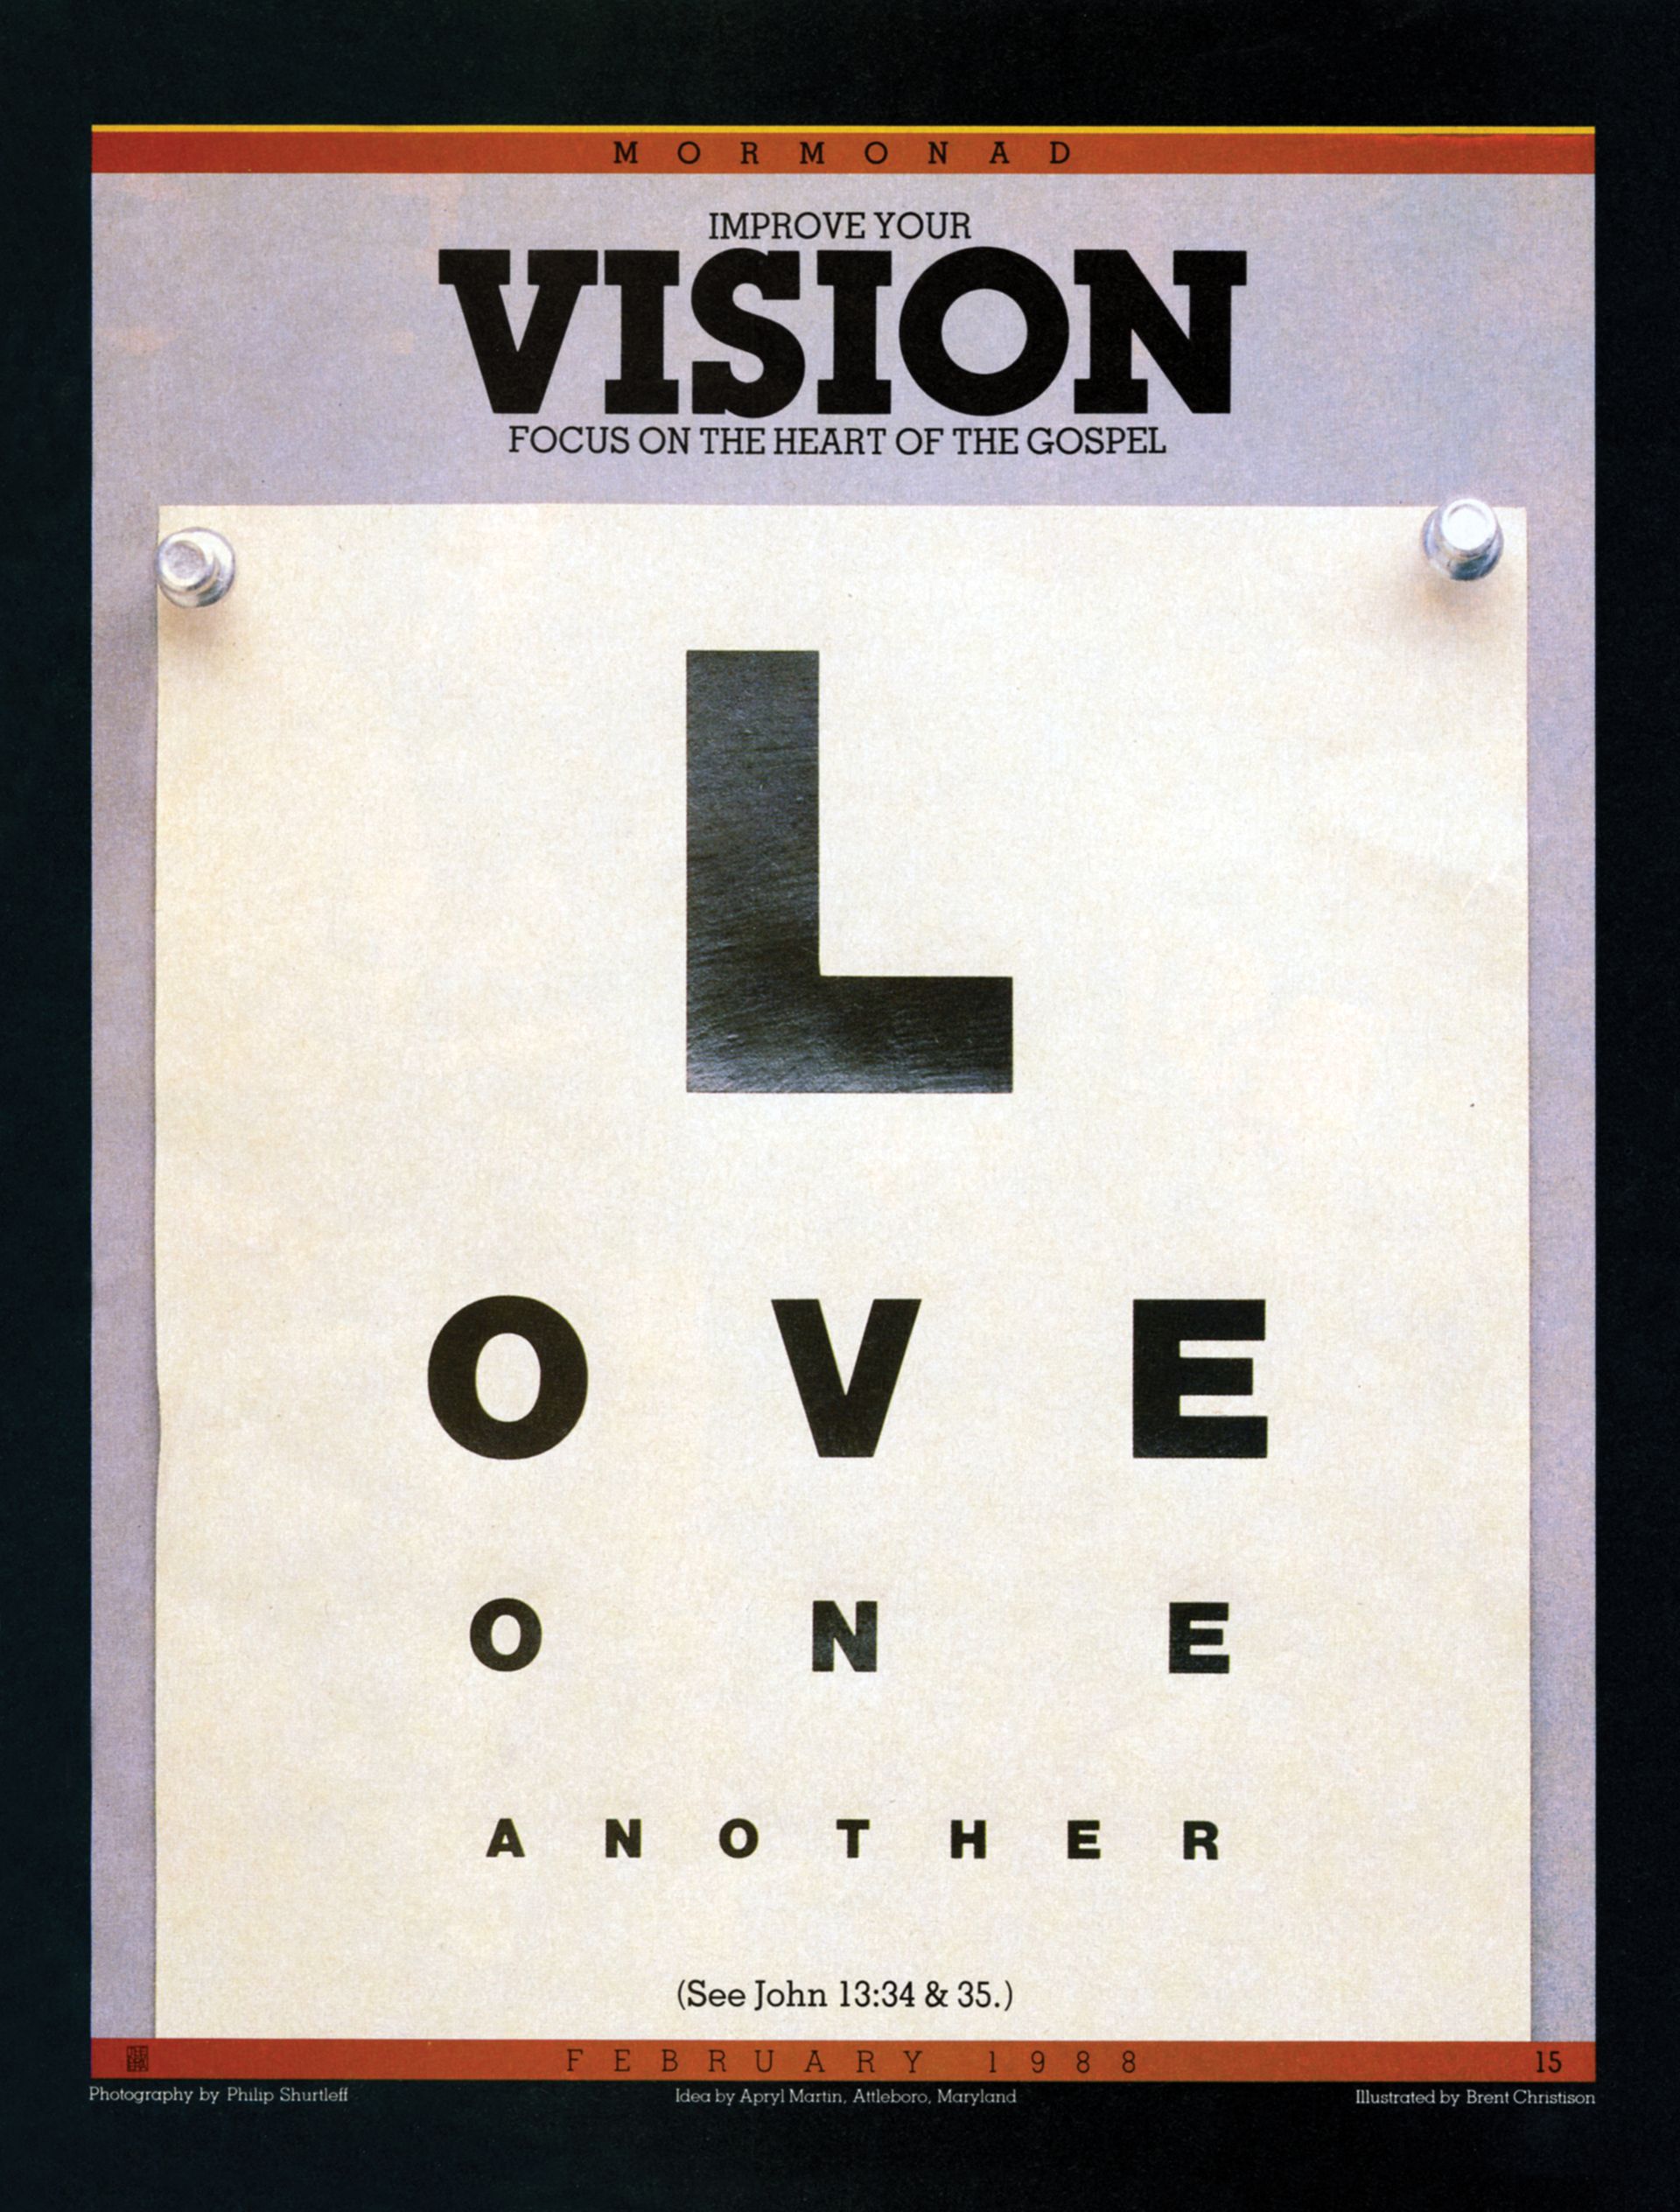 Improve Your Vision. Focus on the heart of the gospel. Love one another. (See John 13:34 & 35.) Feb. 1988 © undefined ipCode 1.